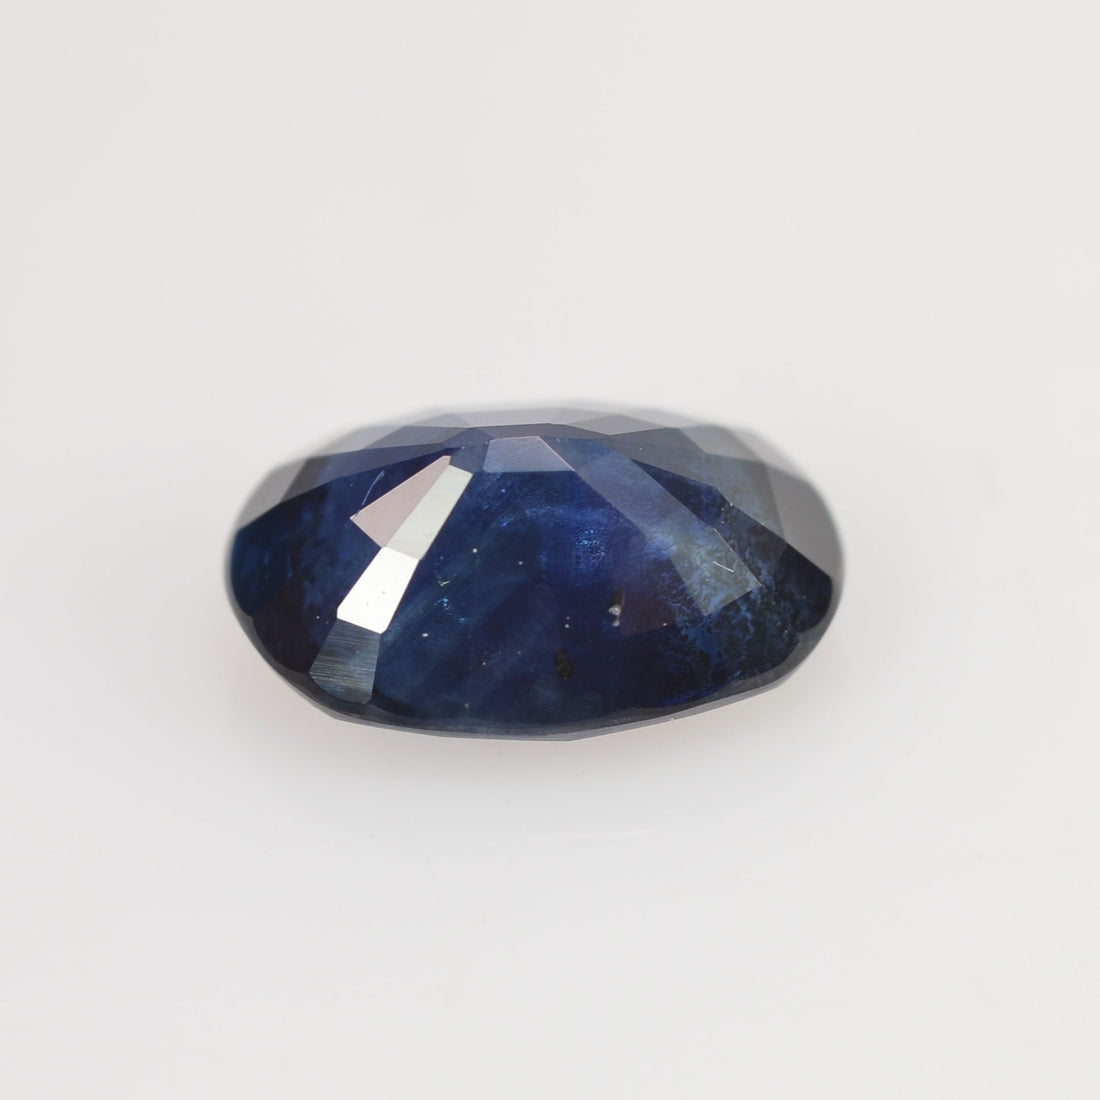 1.26 Cts Natural Blue Sapphire Loose Gemstone Oval Cut